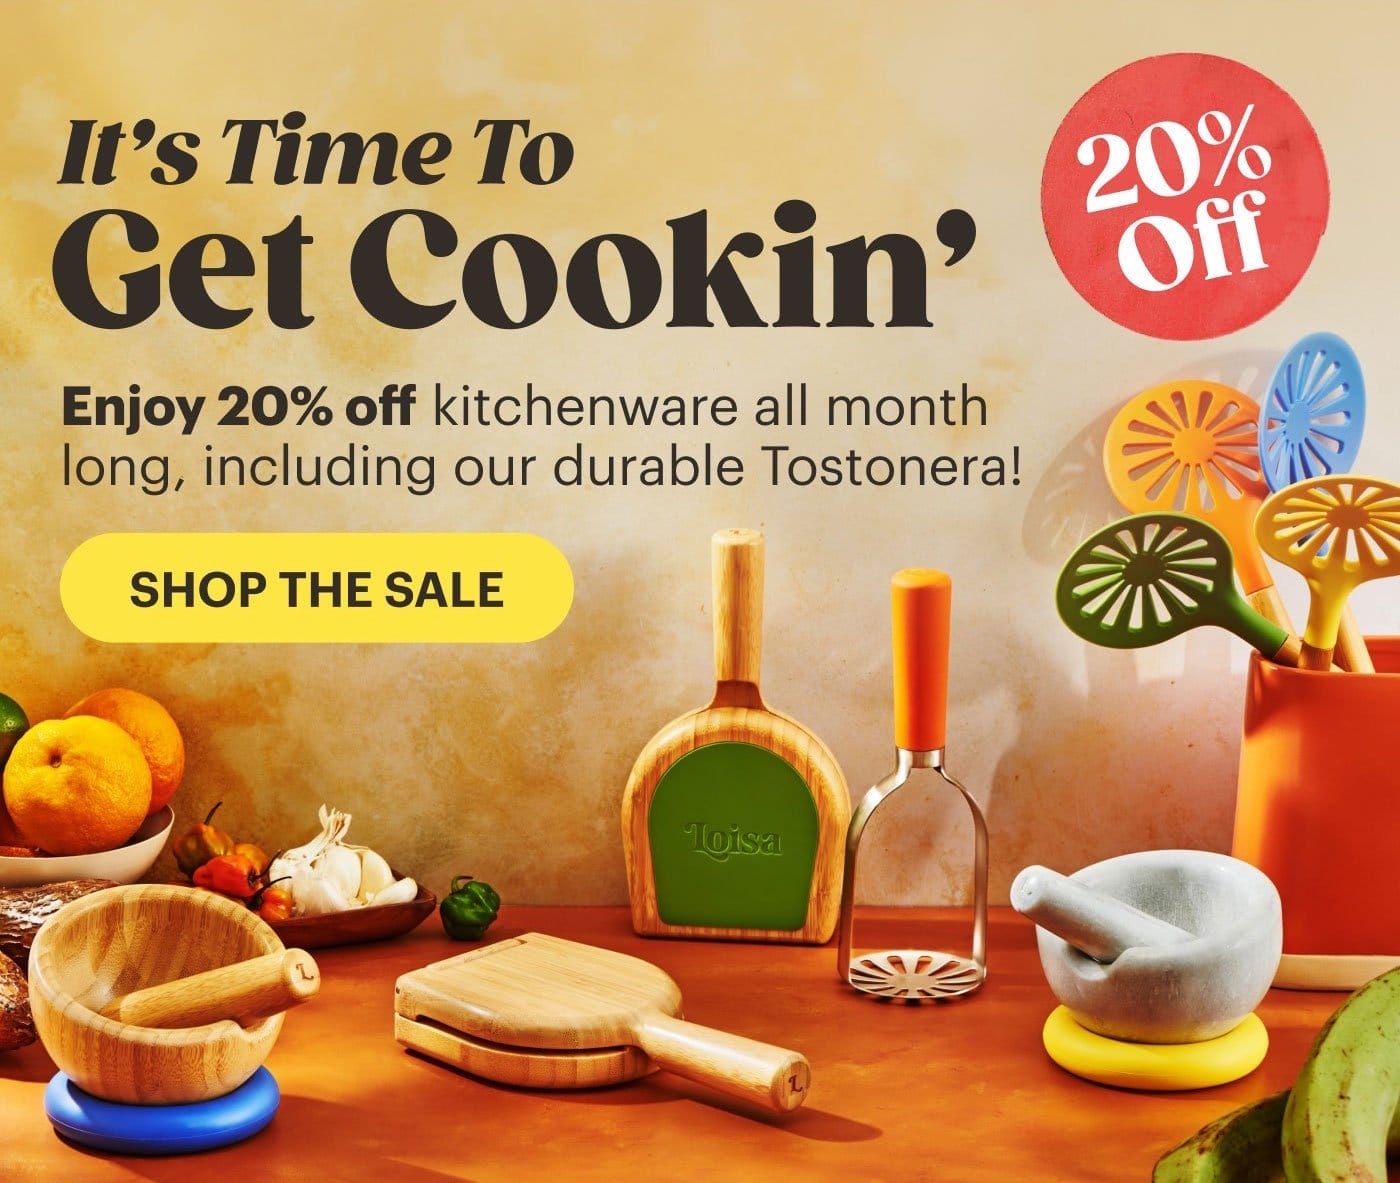 It's Time to Get Cookin' SHOP THE SALE